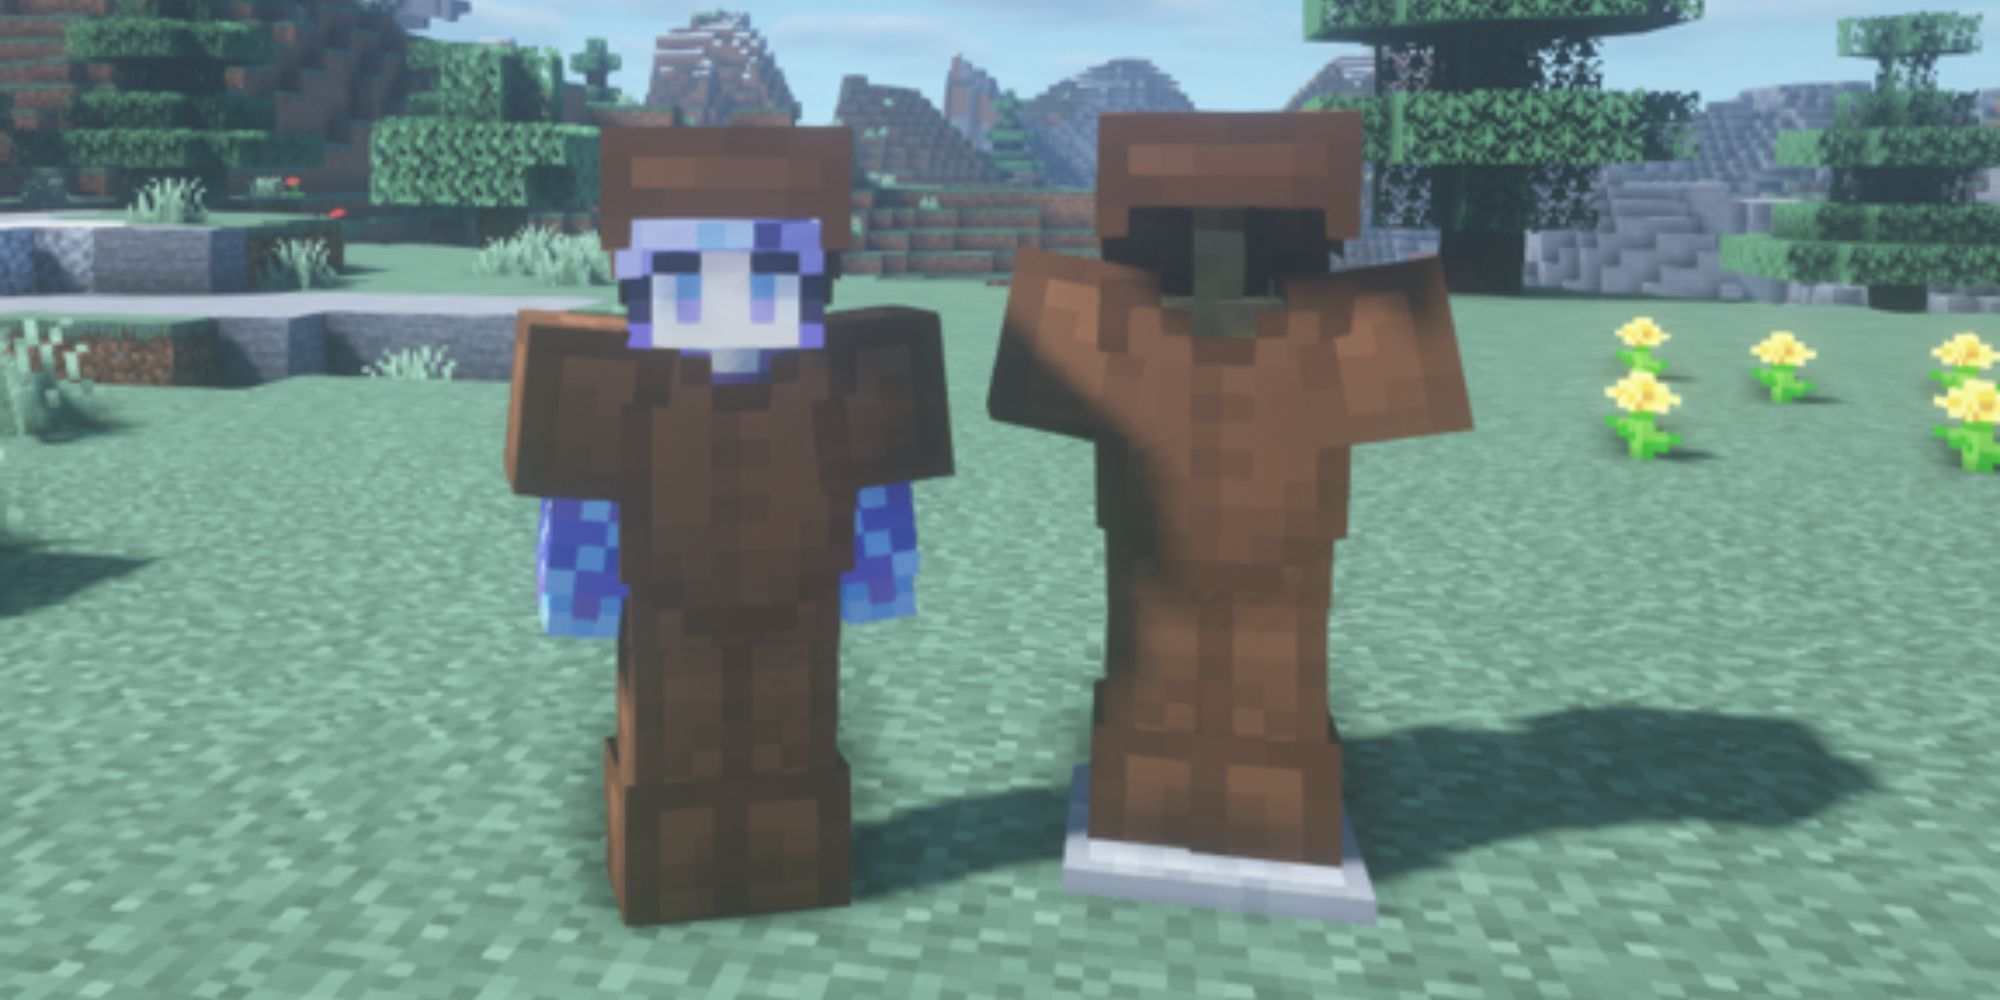 Minecraft Leather Armor Set on character and mannequin side by side